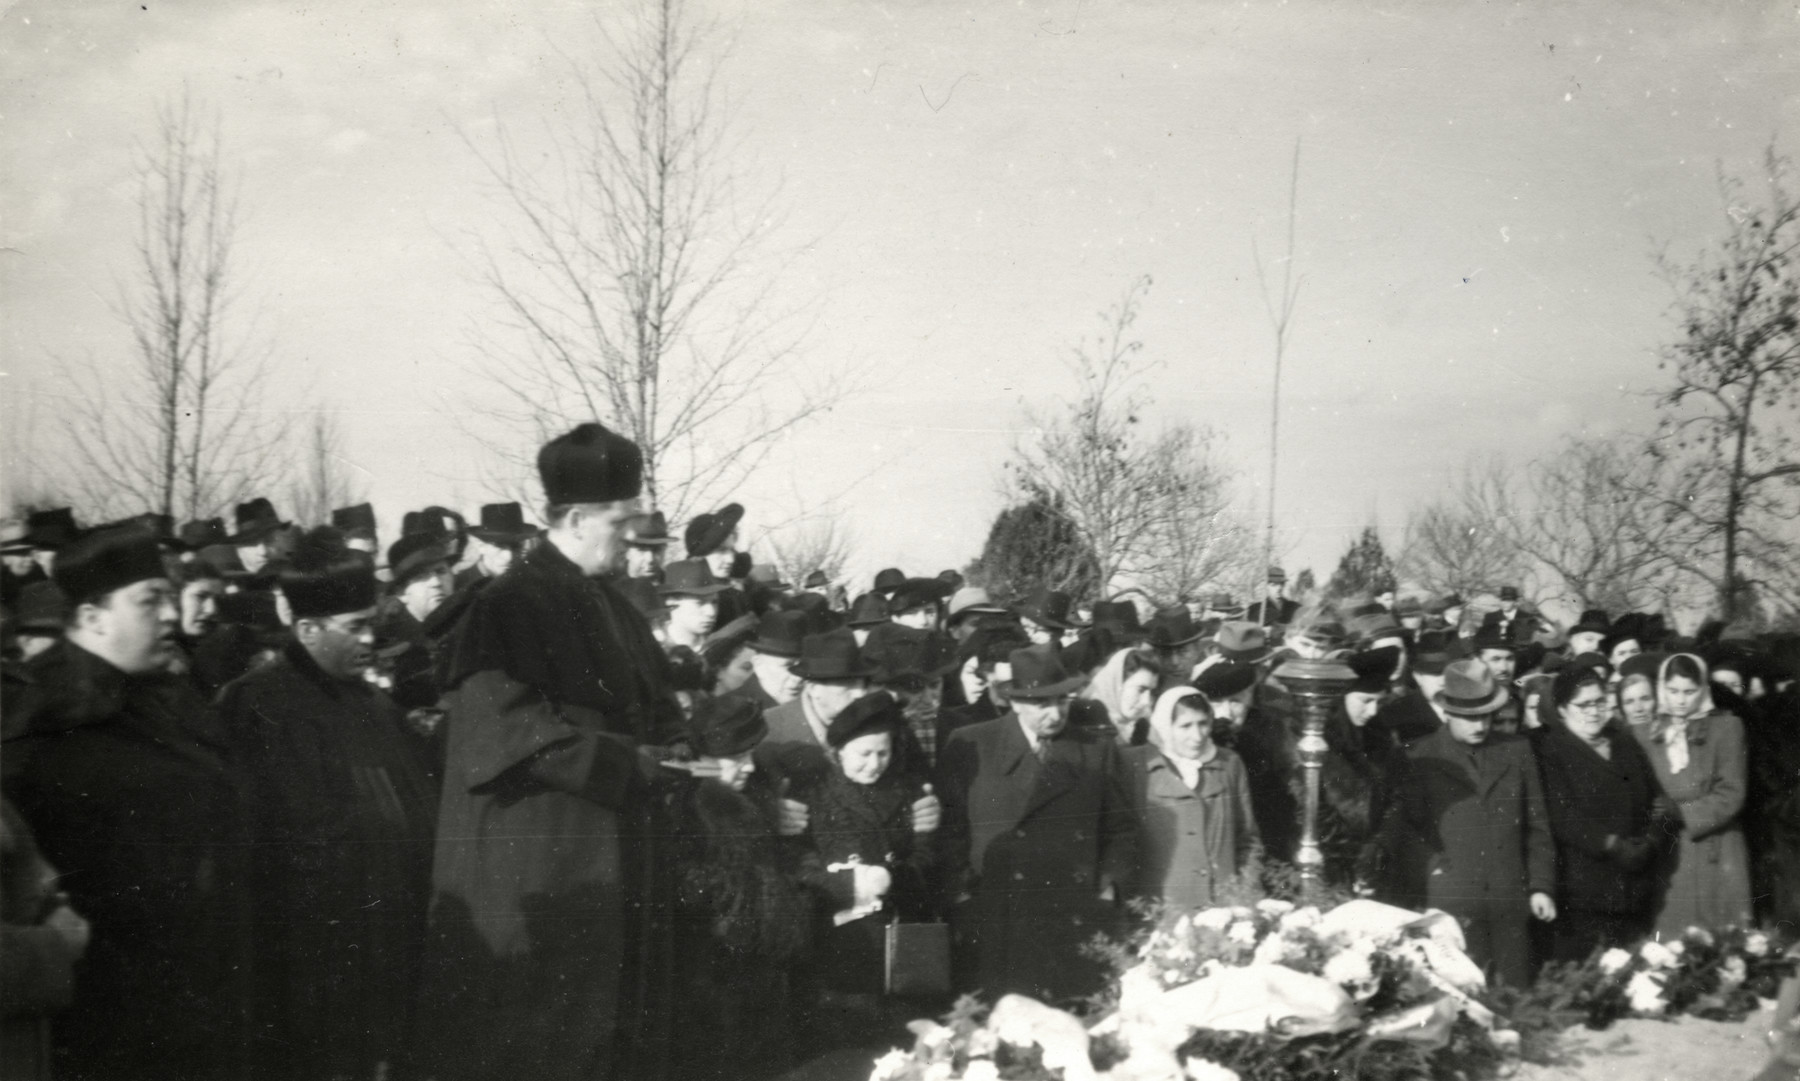 Rabbi Jeno Frenkel leads a memorial service following the exhumation and reburial of Jewish Holocaust victims.

Their bodies were exhumed in Strasshof\ and reburied in Szeged, Hungary.

Among those attending is Pal Gyulai, a survivor  who worked with Rabbi Frankel on this project to return victims remains from Strasshoff, Austria.